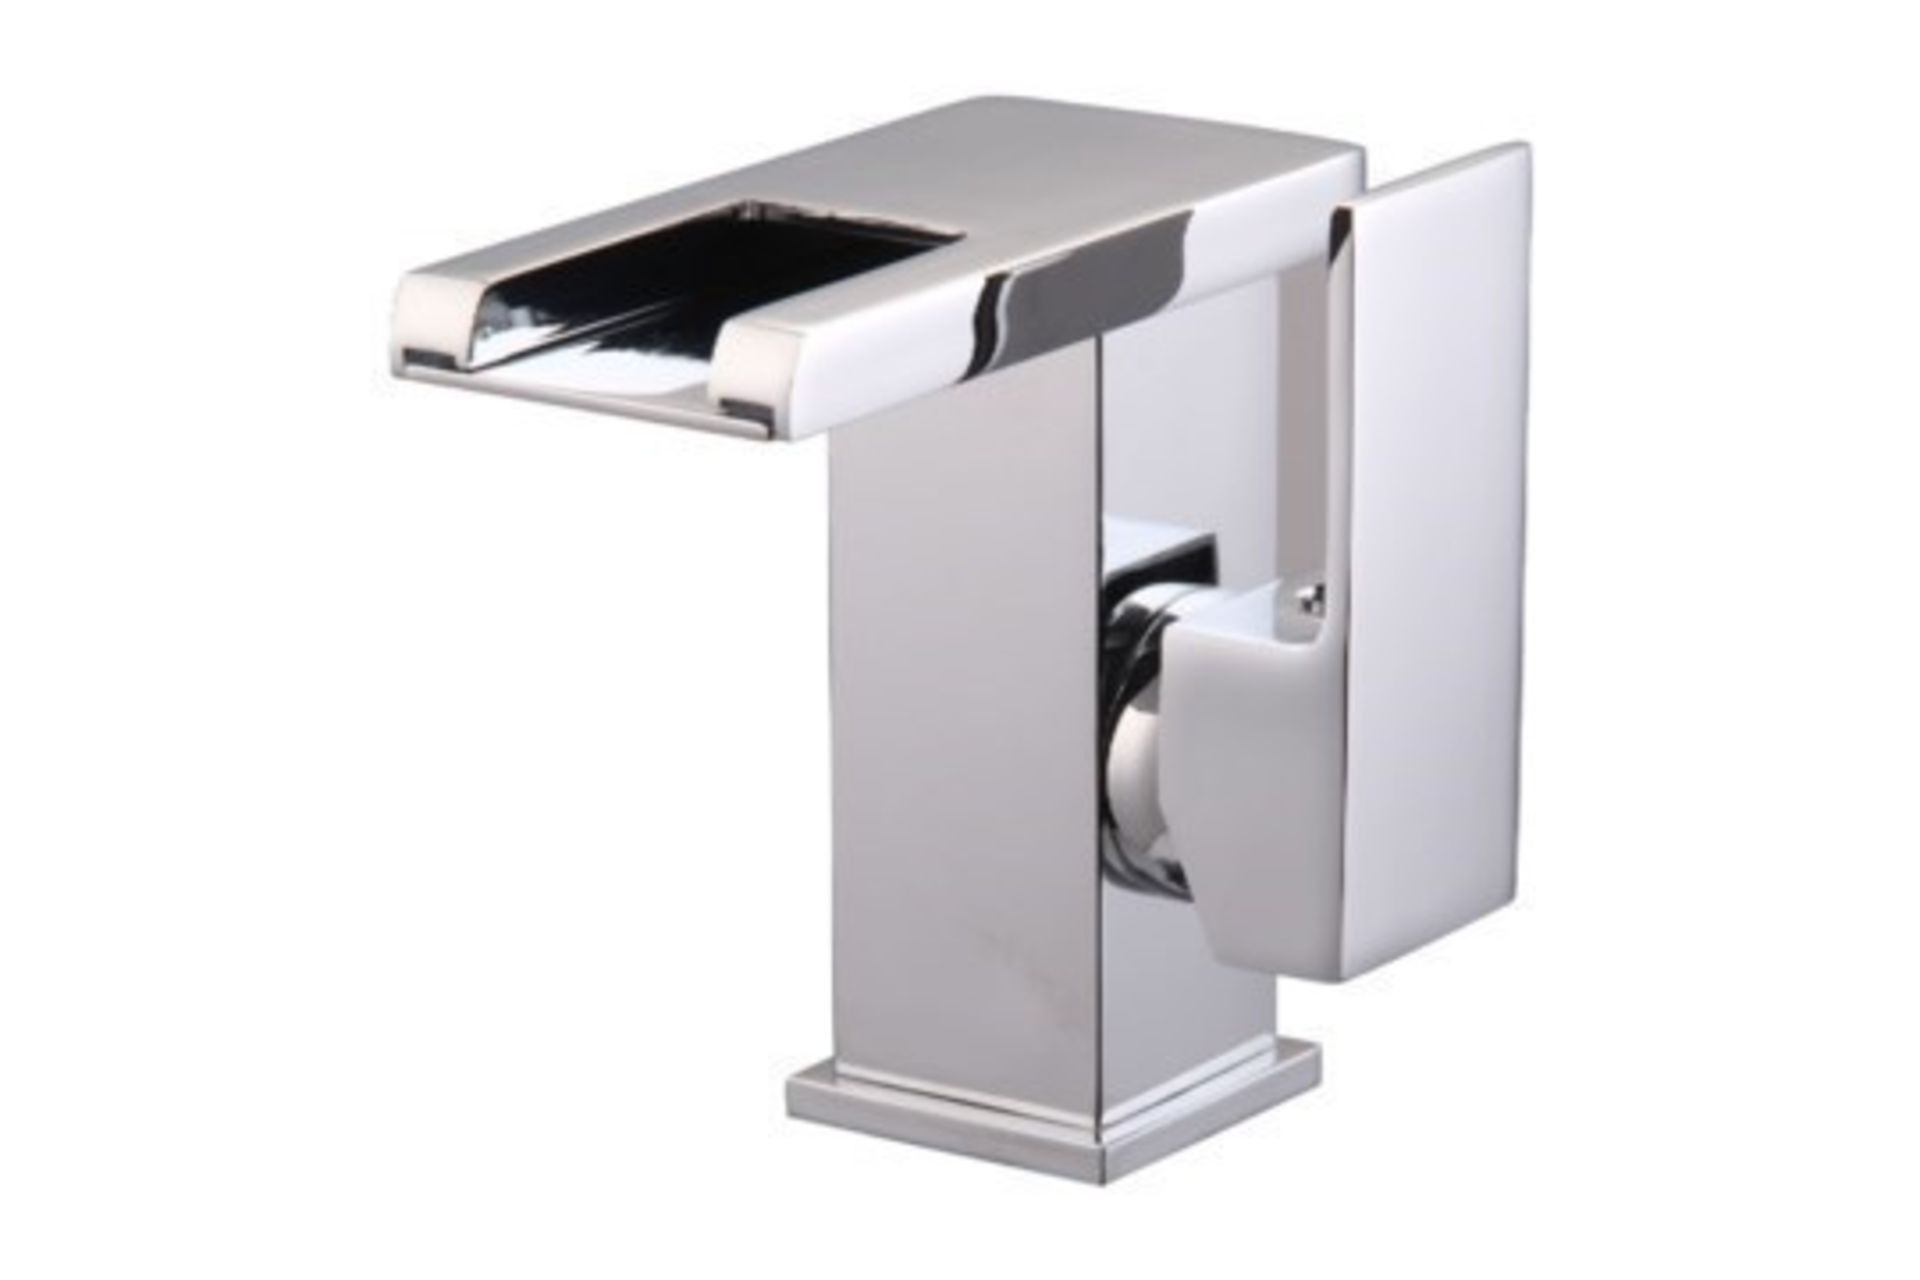 (QT1020) LED Waterfall Bathroom Basin Mixer Tap. RRP £229.99.Easy to install and clean. All ... - Image 3 of 4